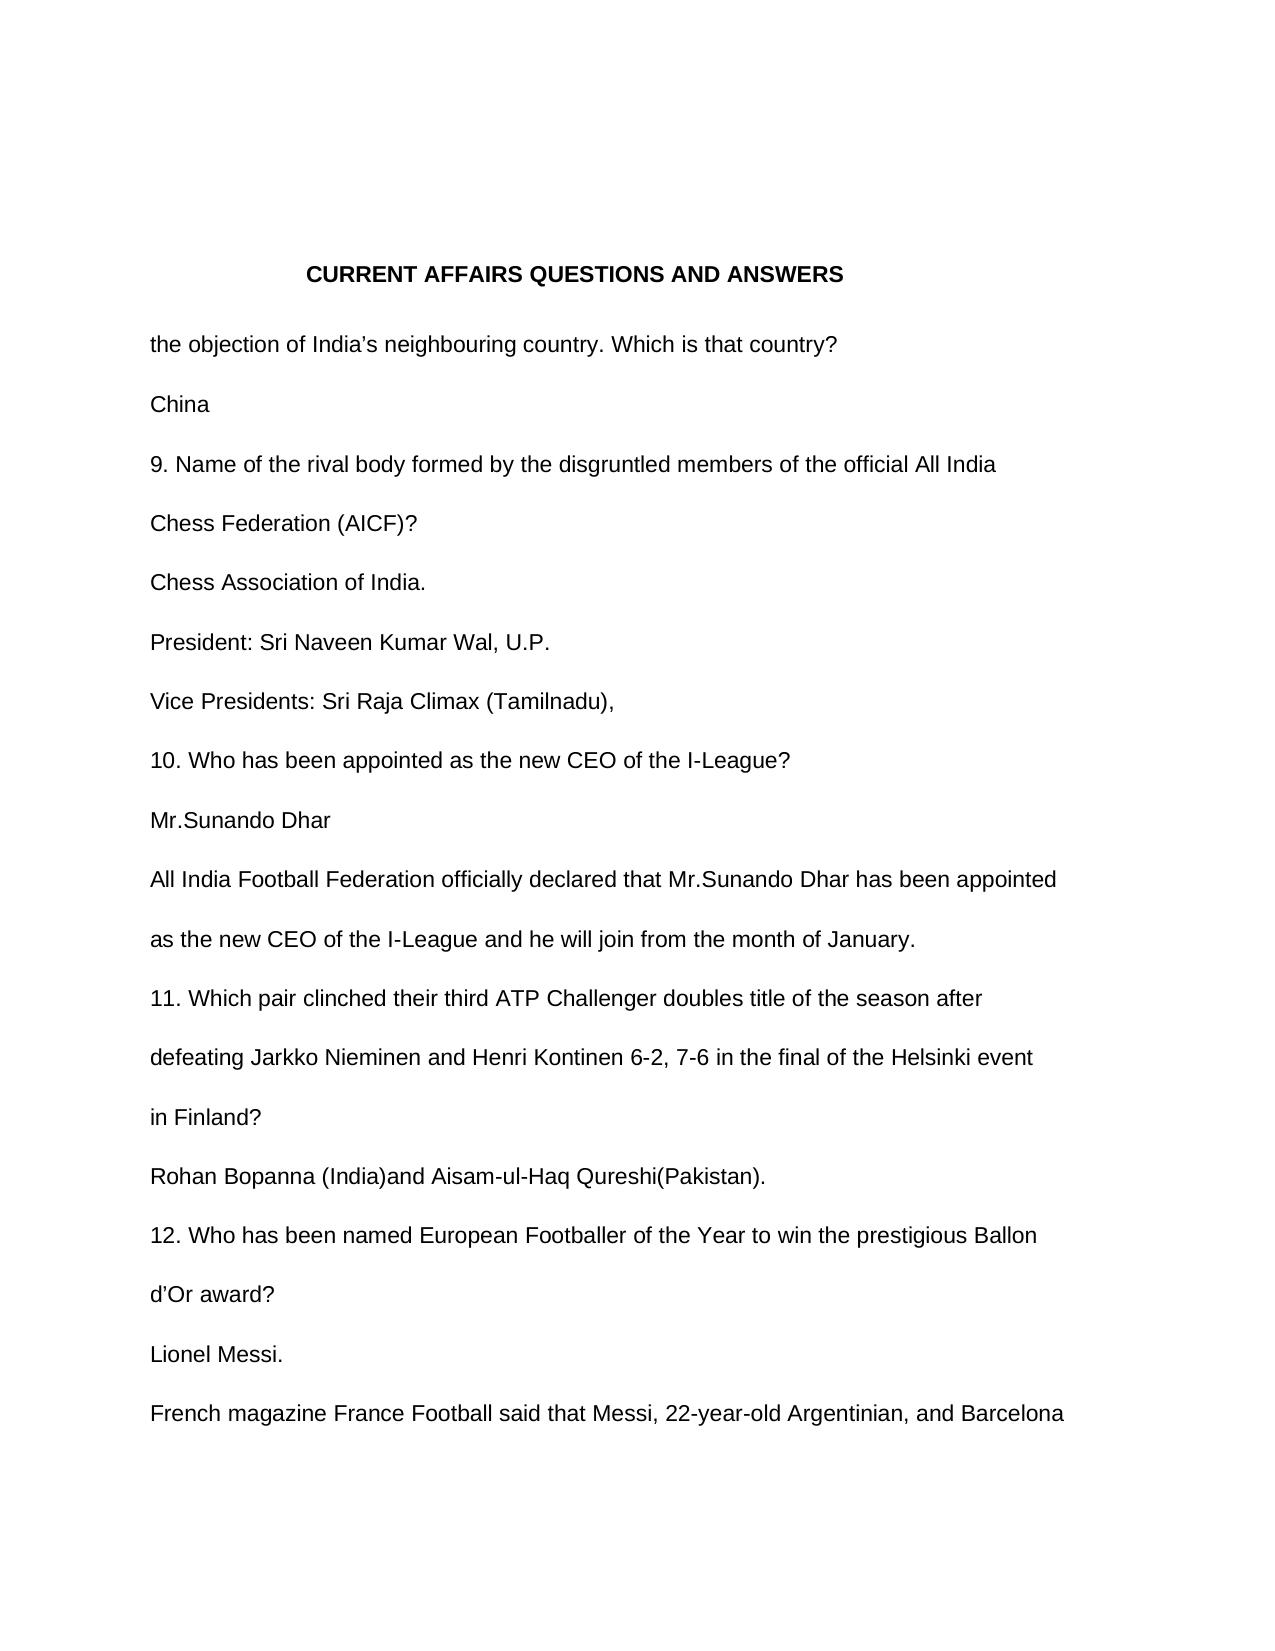 APTWRIES Old Papers: Current Affairs - Page 4